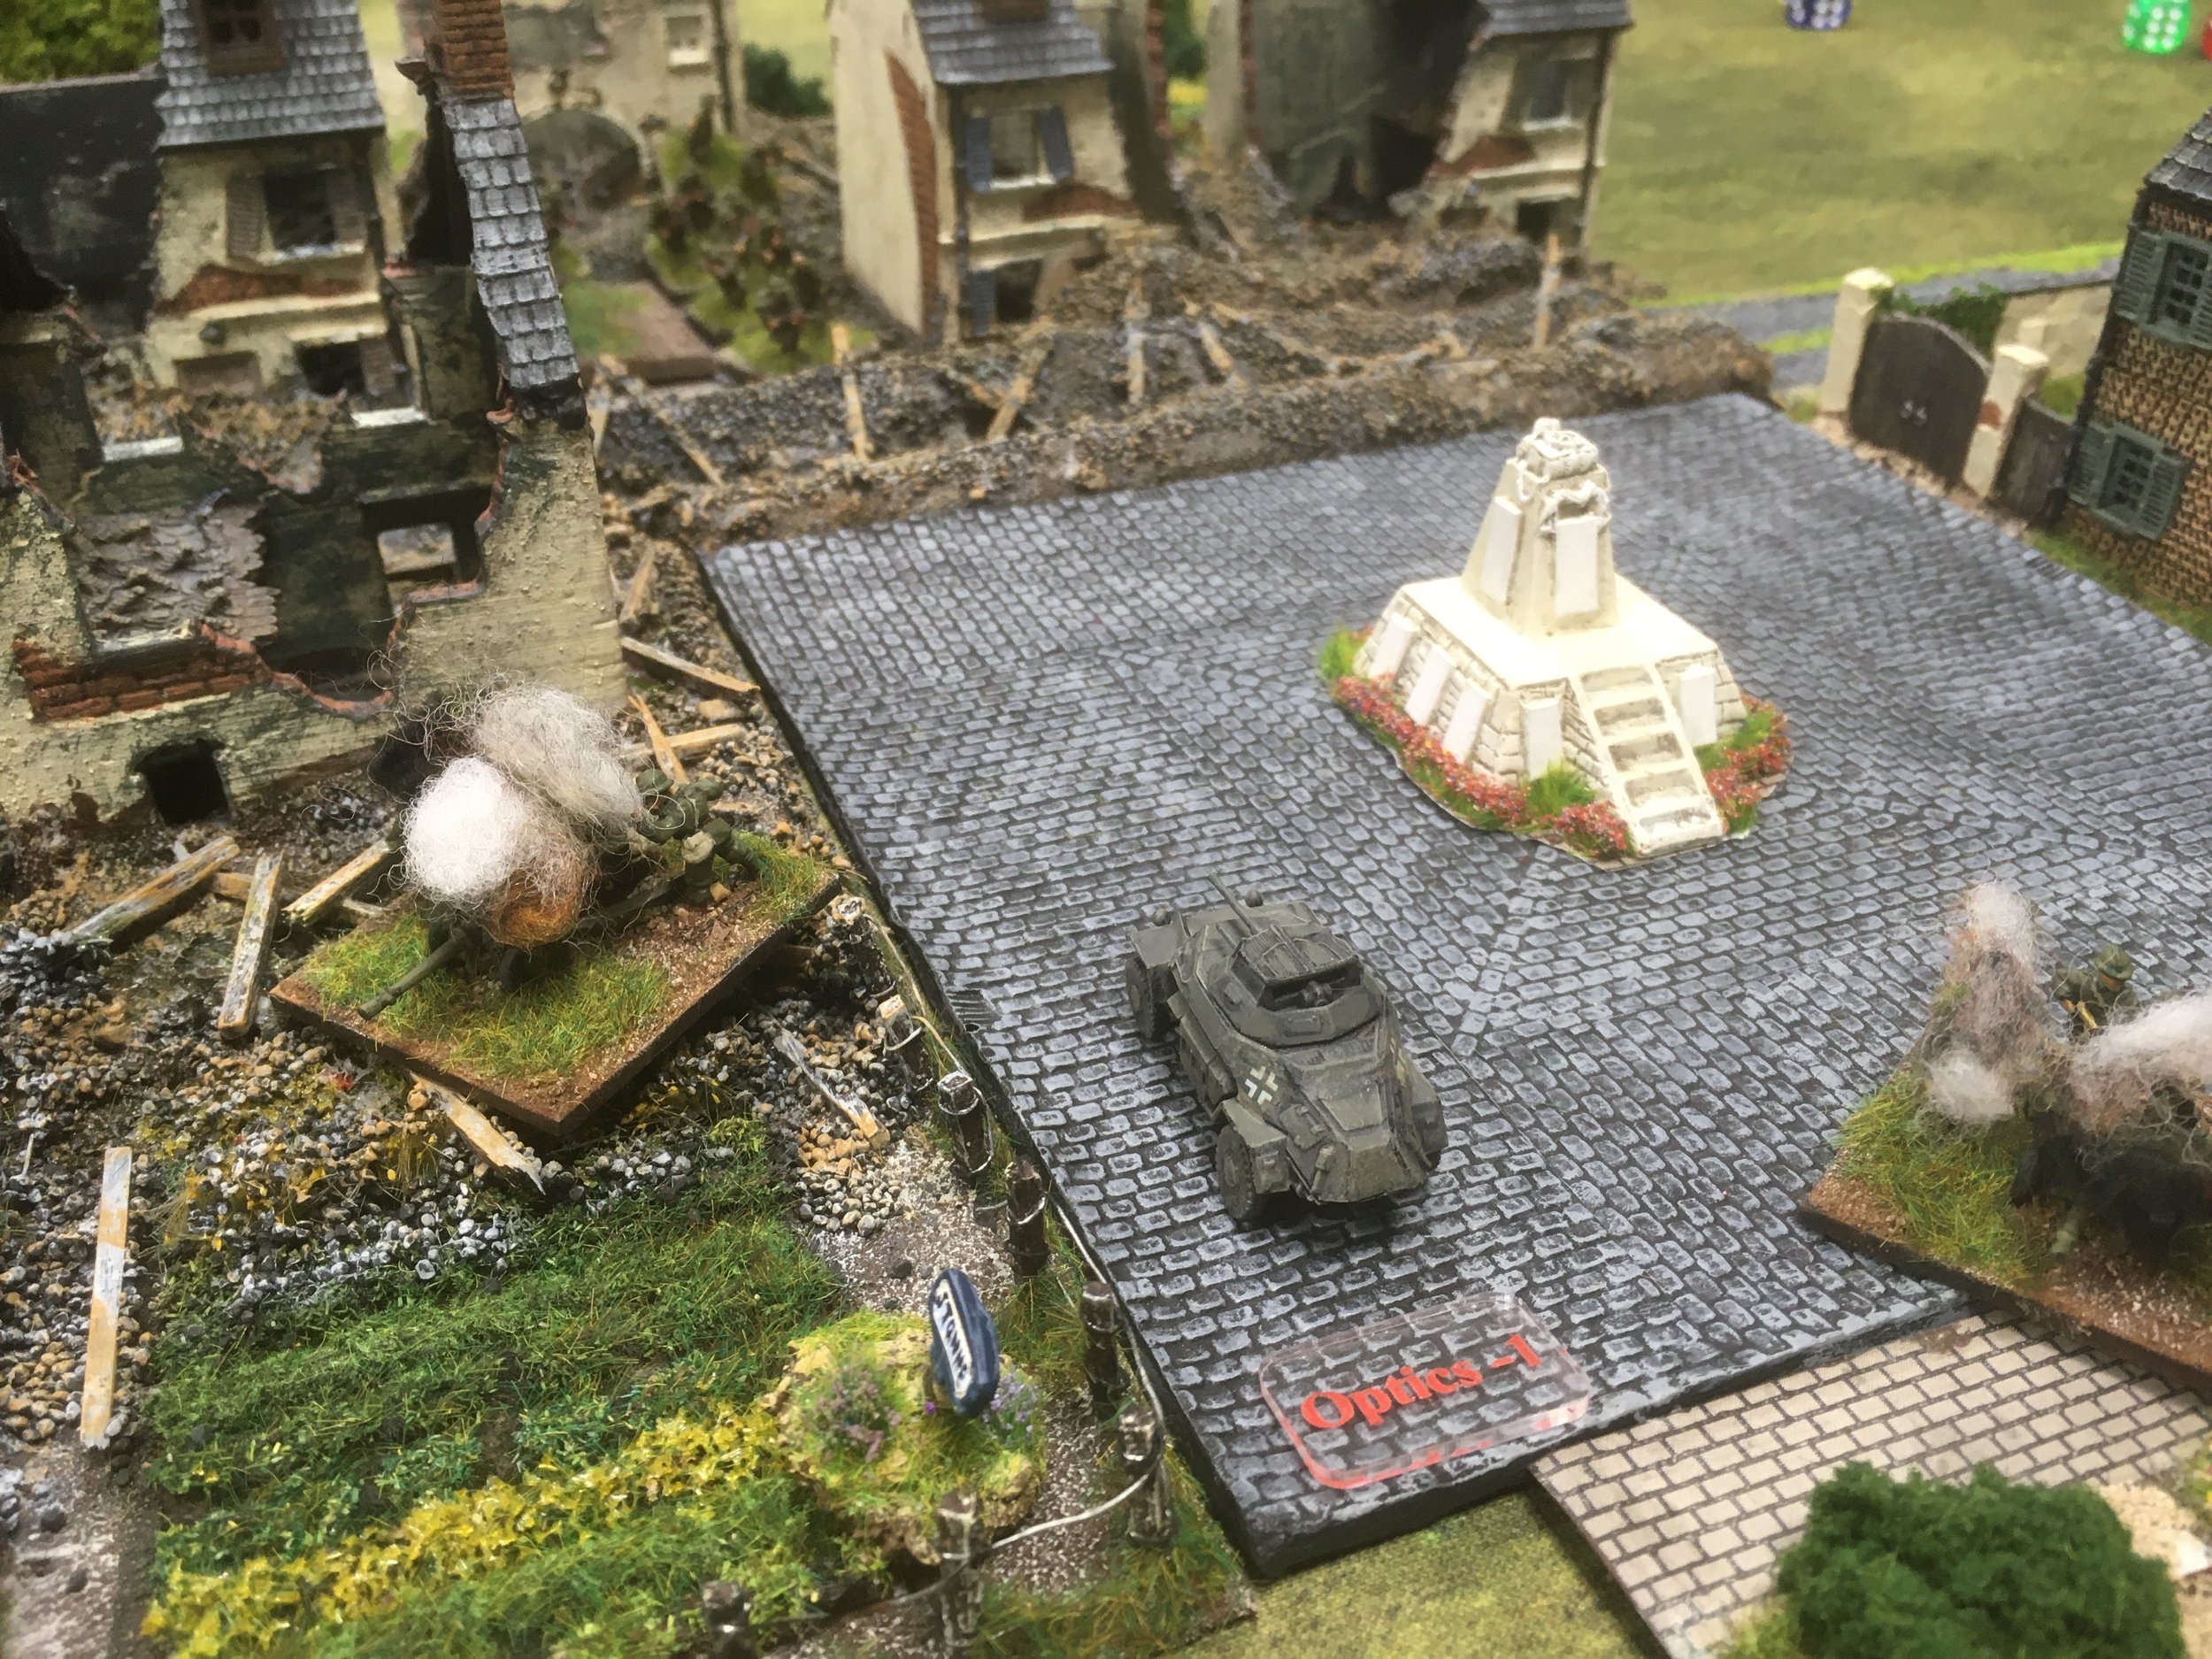 As the Sd.Kfz 222 moves into the village square to uncover the final French 'blind' - which turns out to be a dummy.